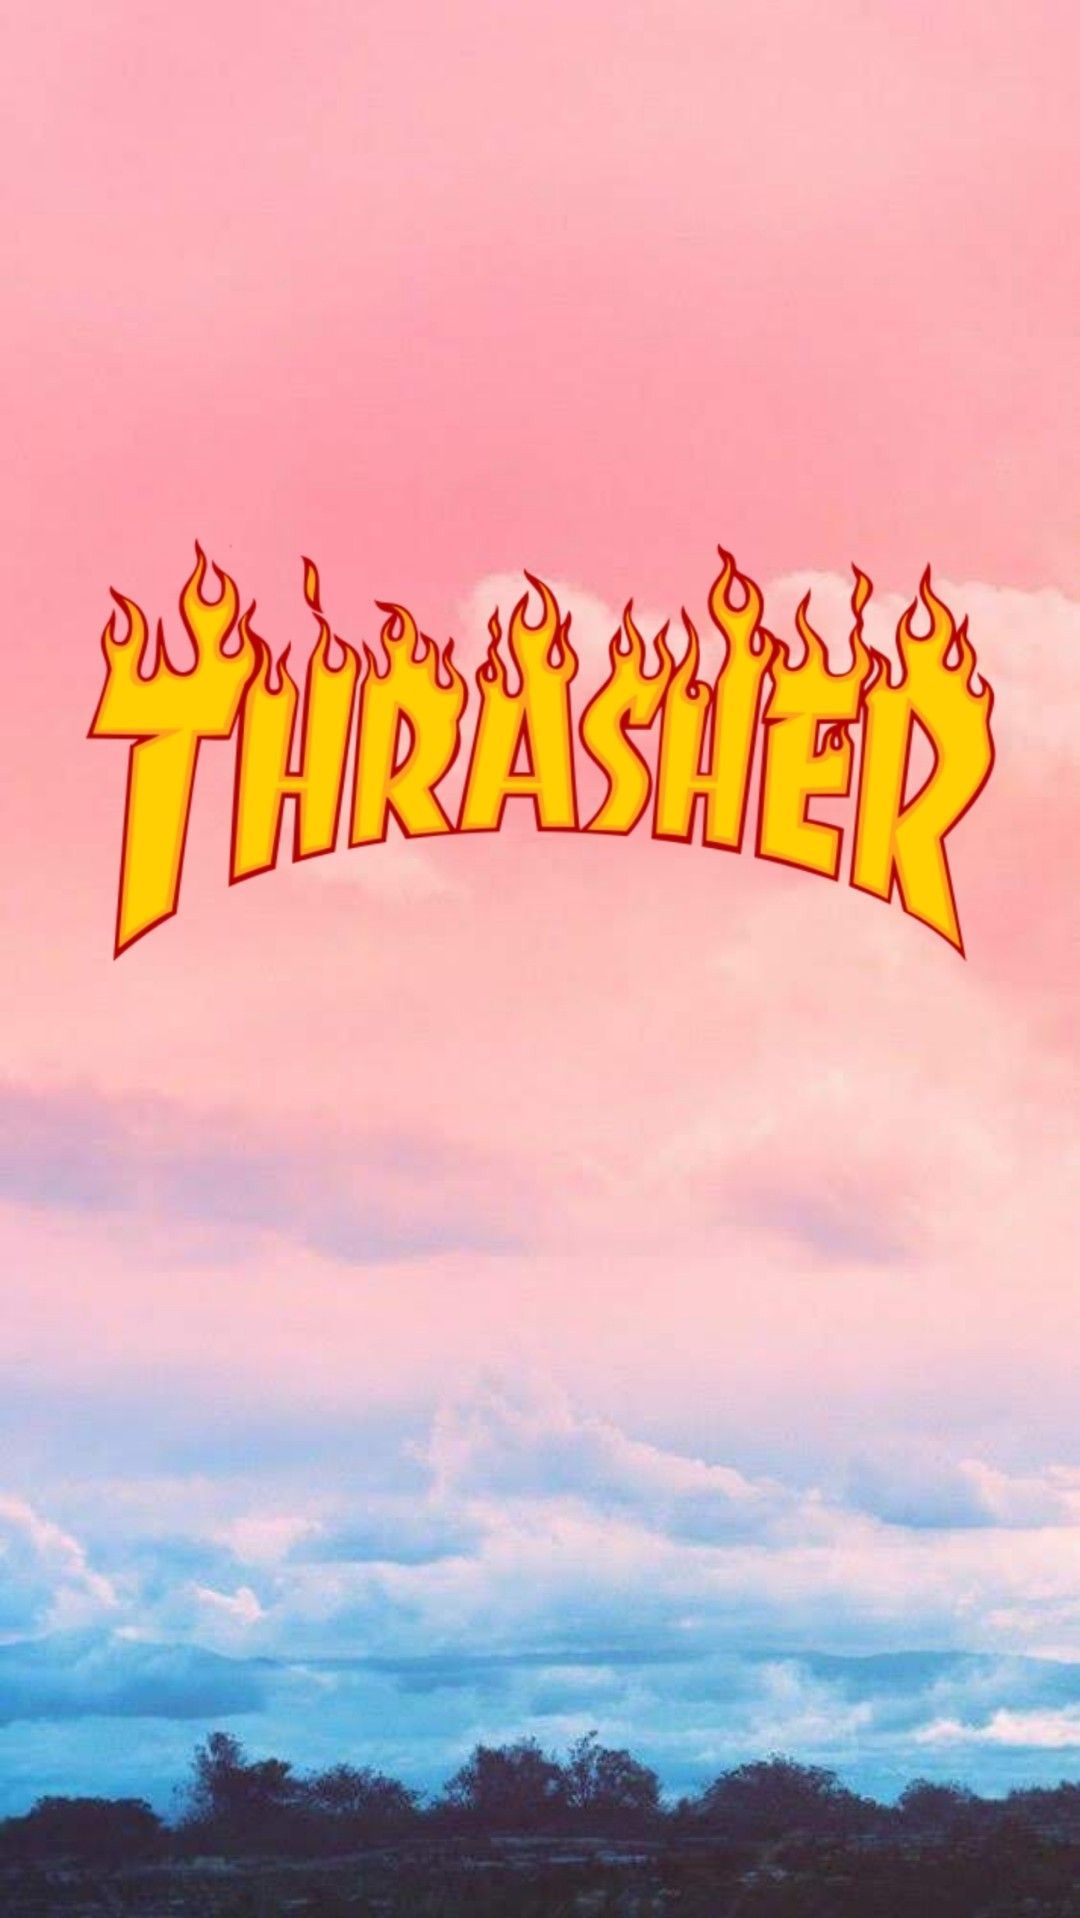 IPhone Wallpaper Thrasher with high-resolution 1080x1920 pixel. You can use this wallpaper for your iPhone 5, 6, 7, 8, X, XS, XR backgrounds, Mobile Screensaver, or iPad Lock Screen - Thrasher